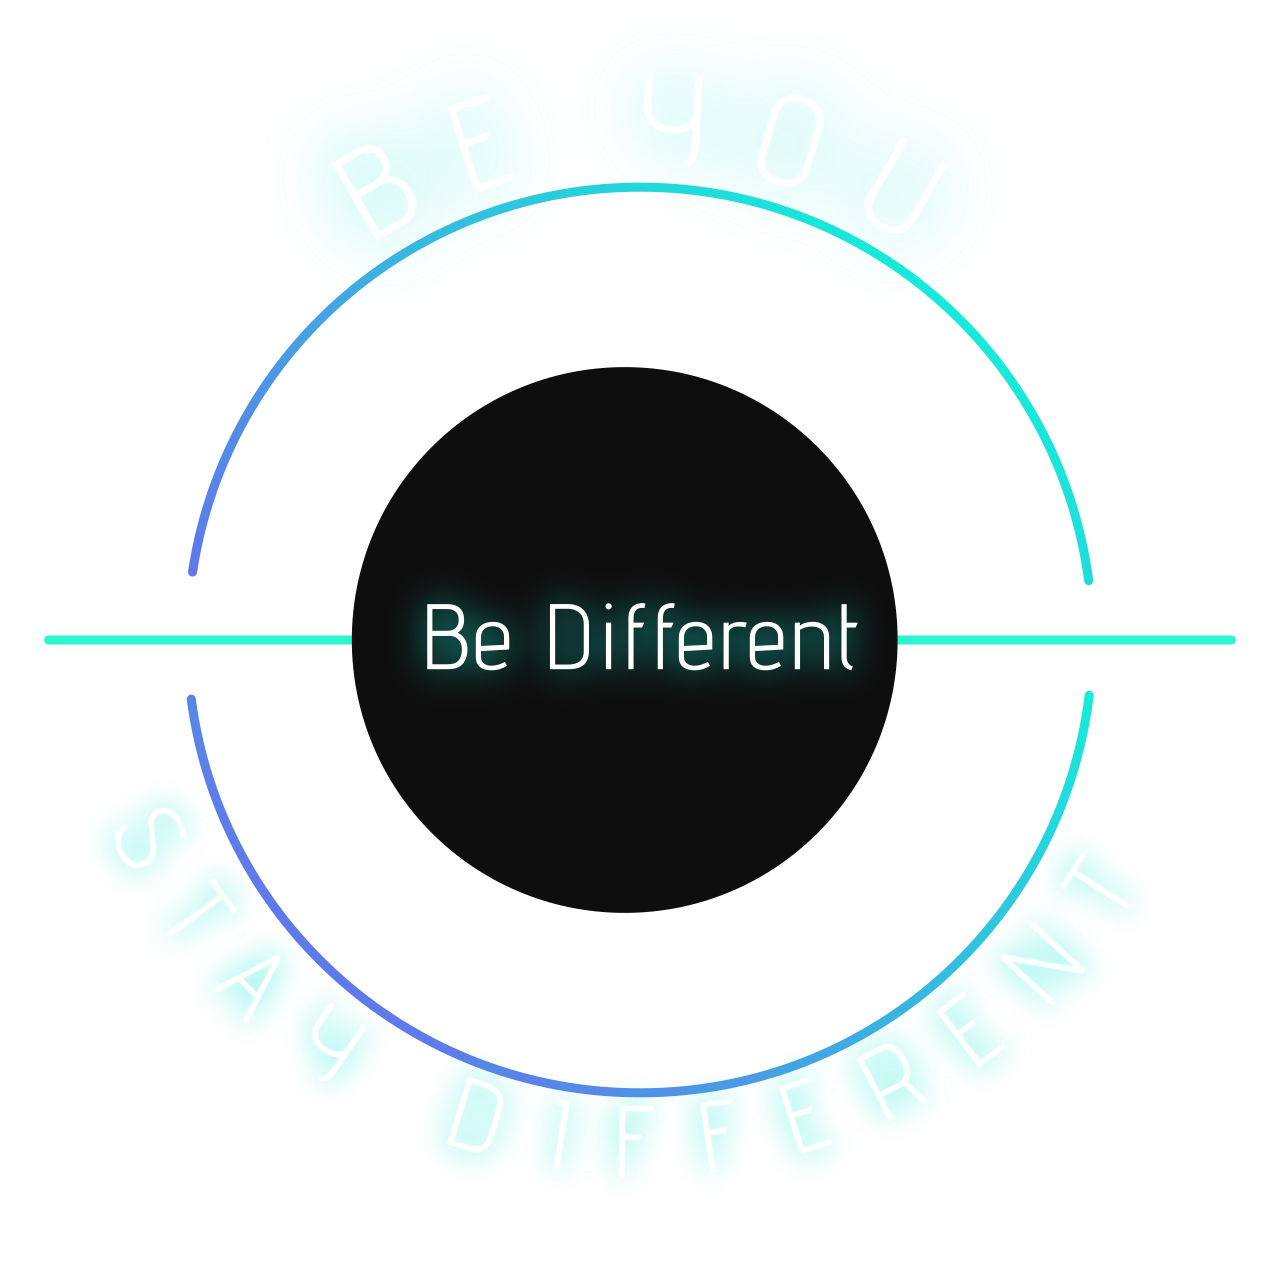 Be Different's web page